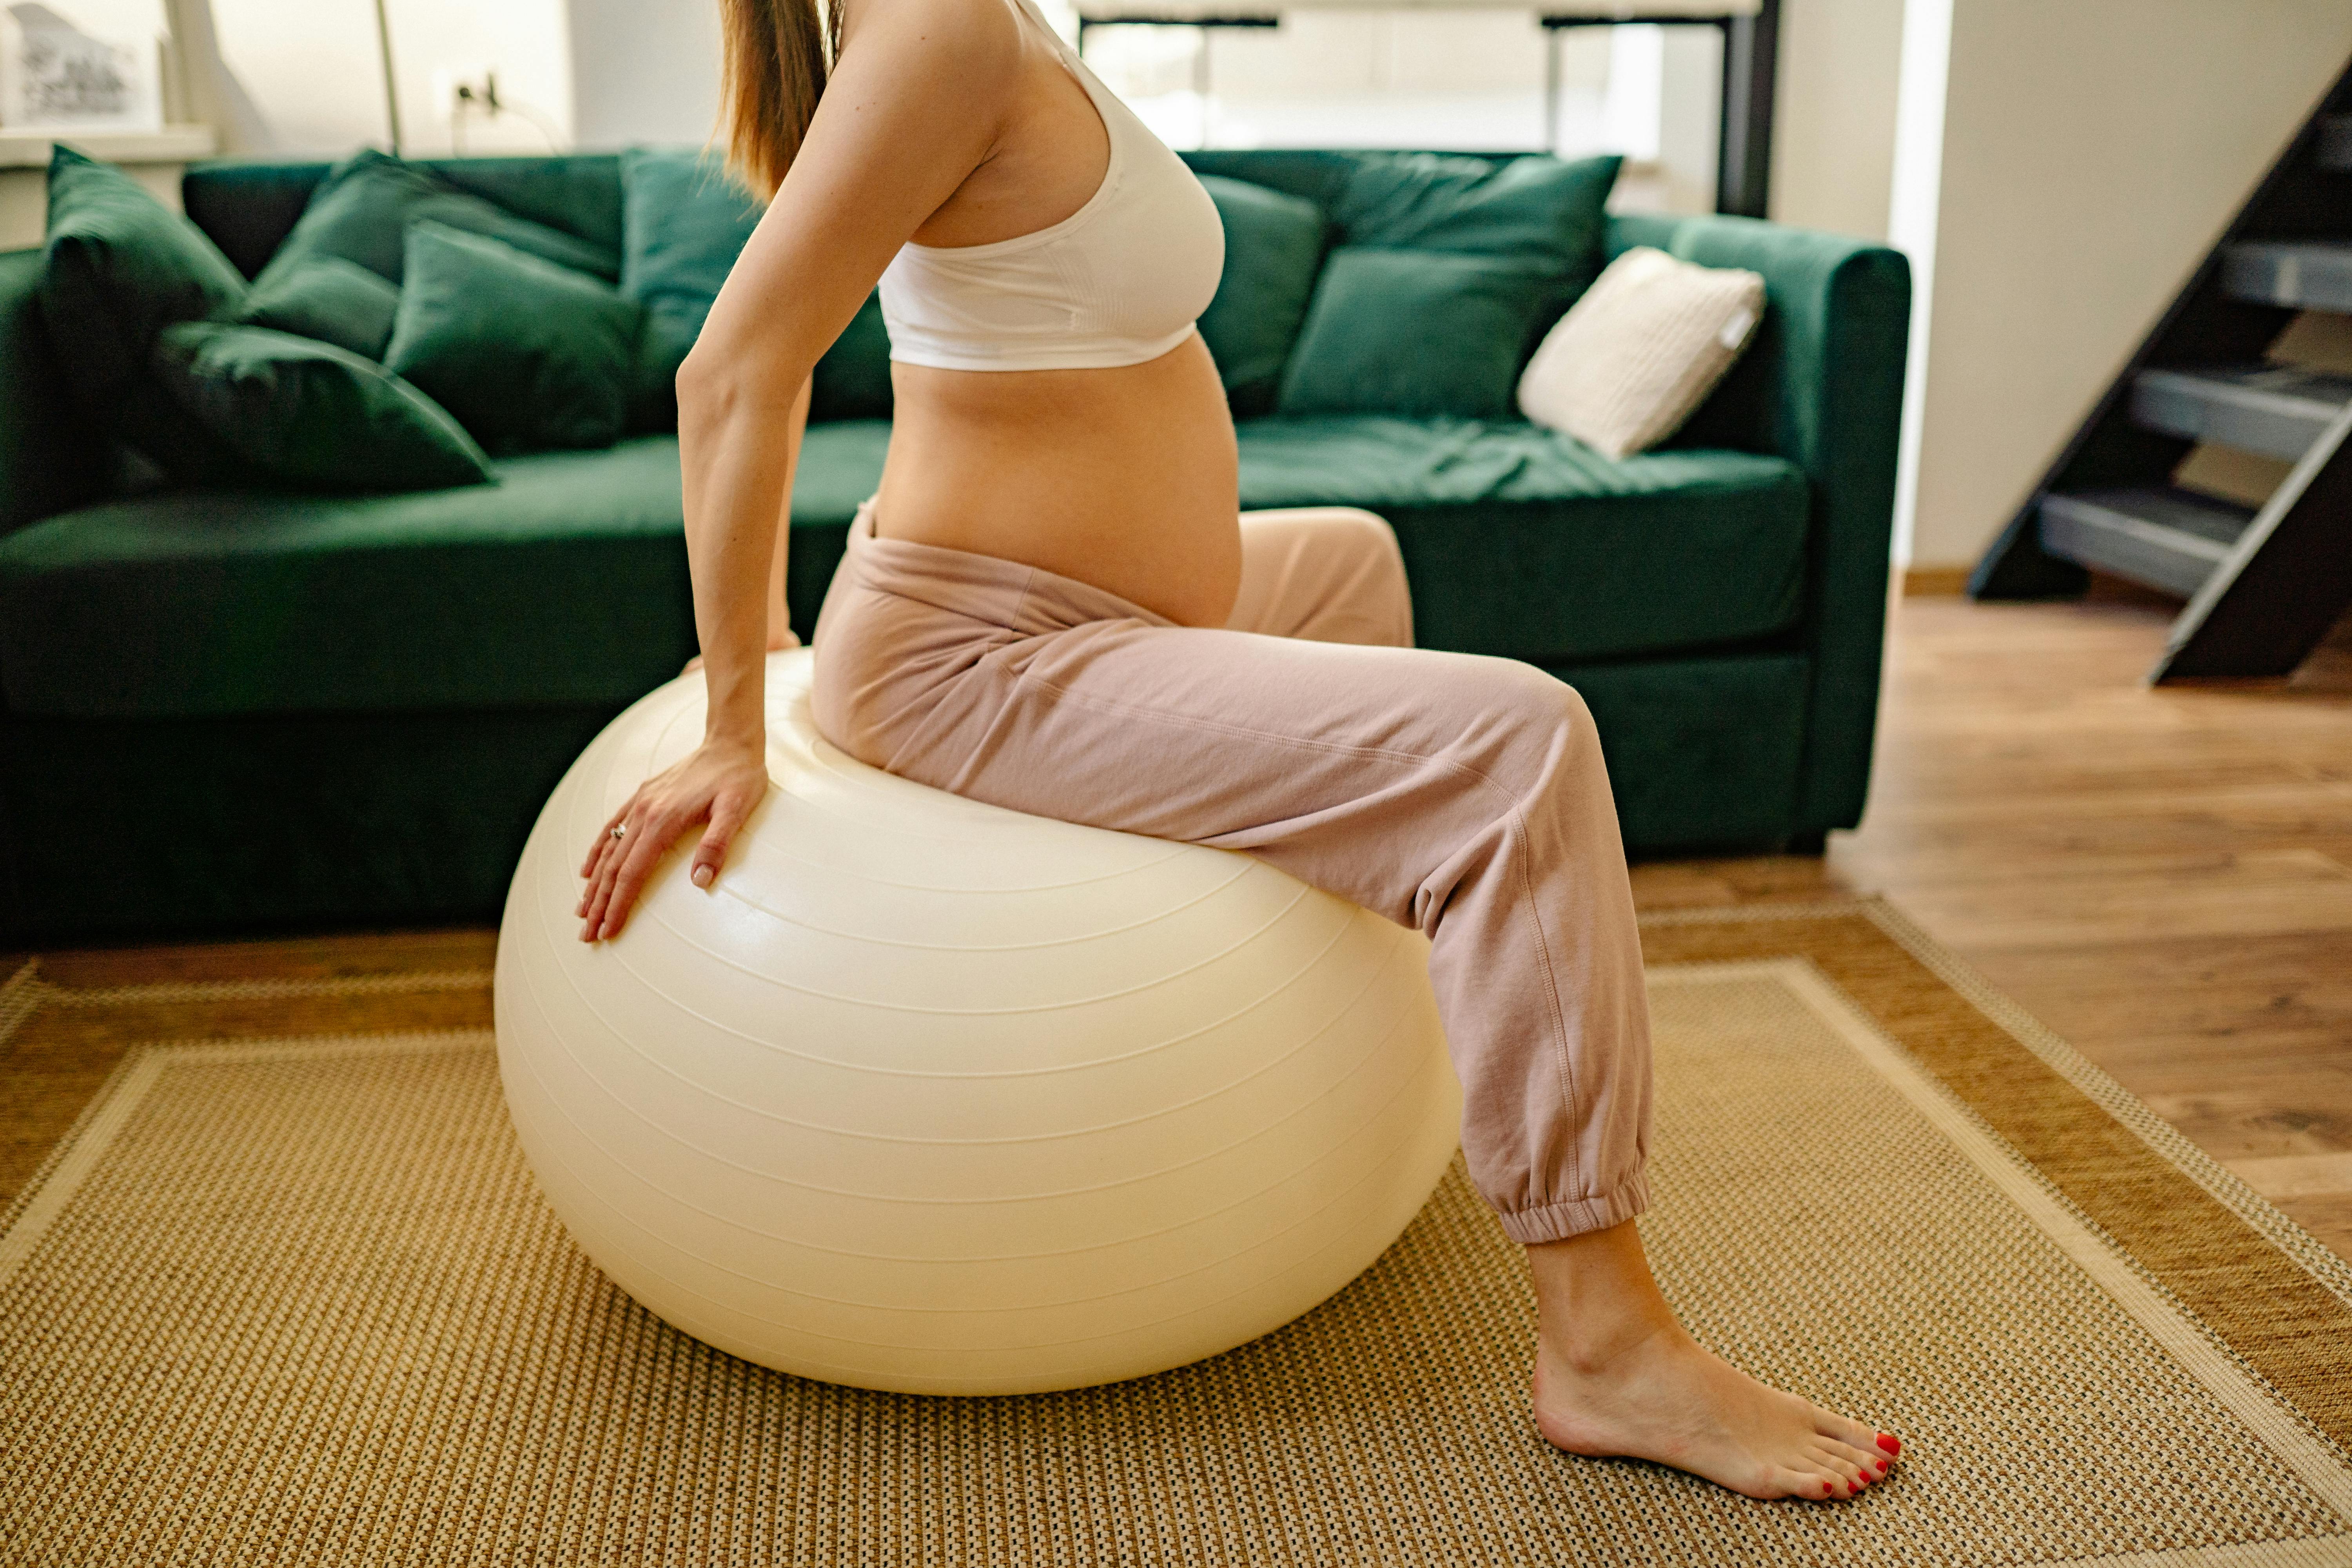  Staying Fit During Pregnancy: Safe Guidelines and Tips